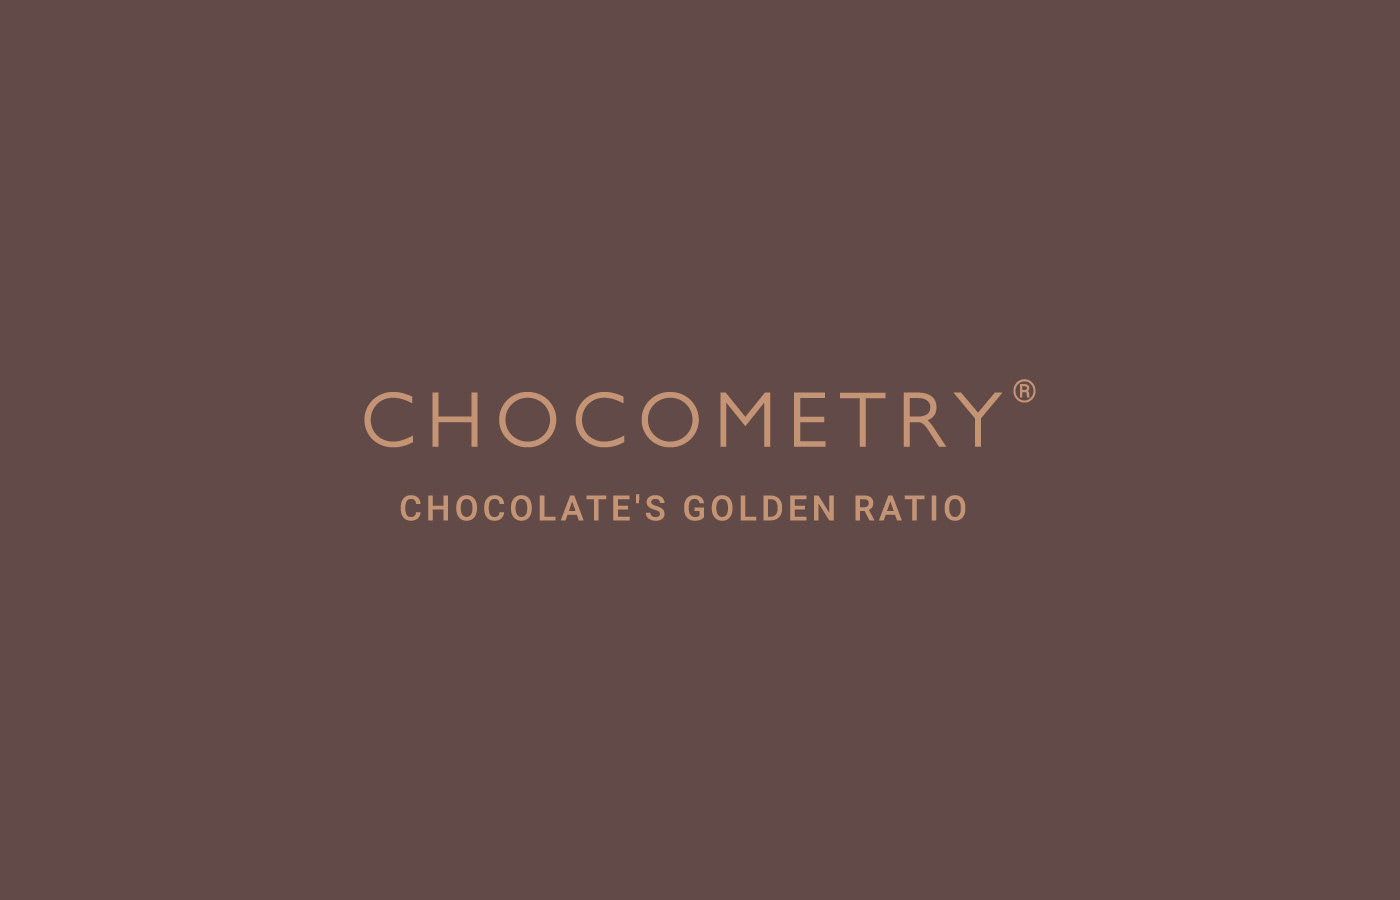 chocolate brand Greece products drink wedesign chocometry